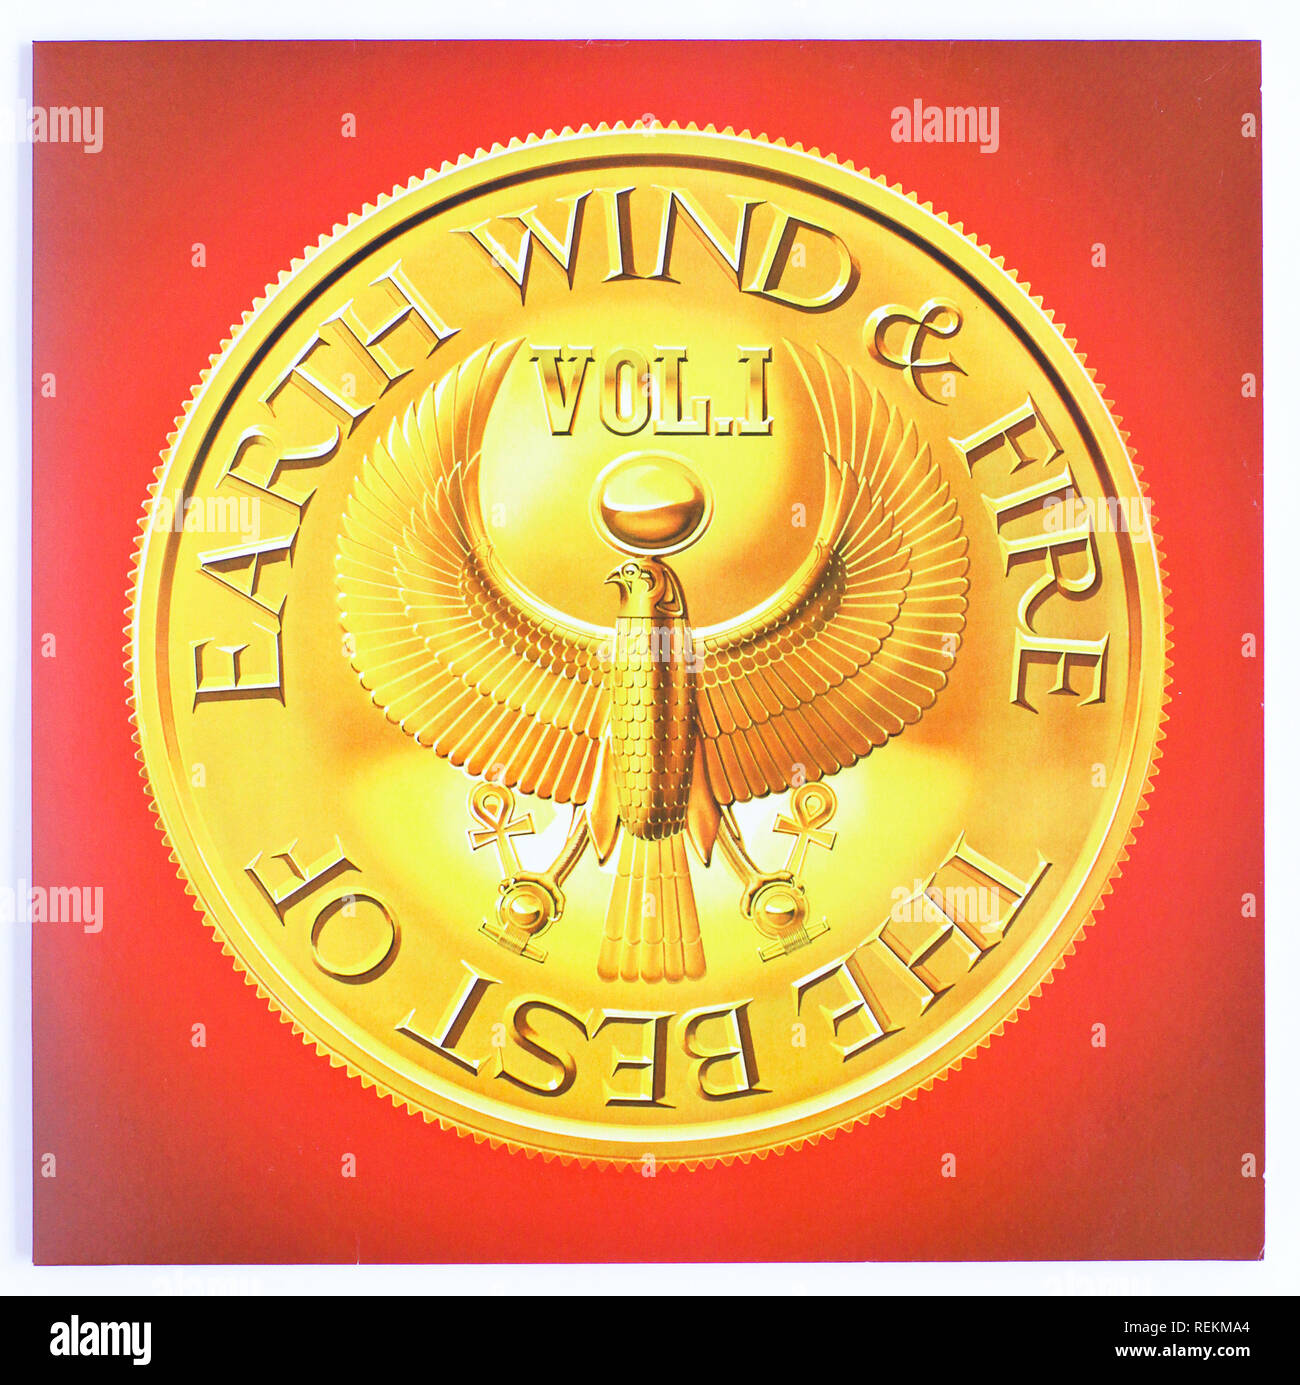 The cover of The Best of Earth, Wind & Fire Vol 1 by Earth, Wind & Fire. 1978 album on Columbia Records - Editorial use only Stock Photo